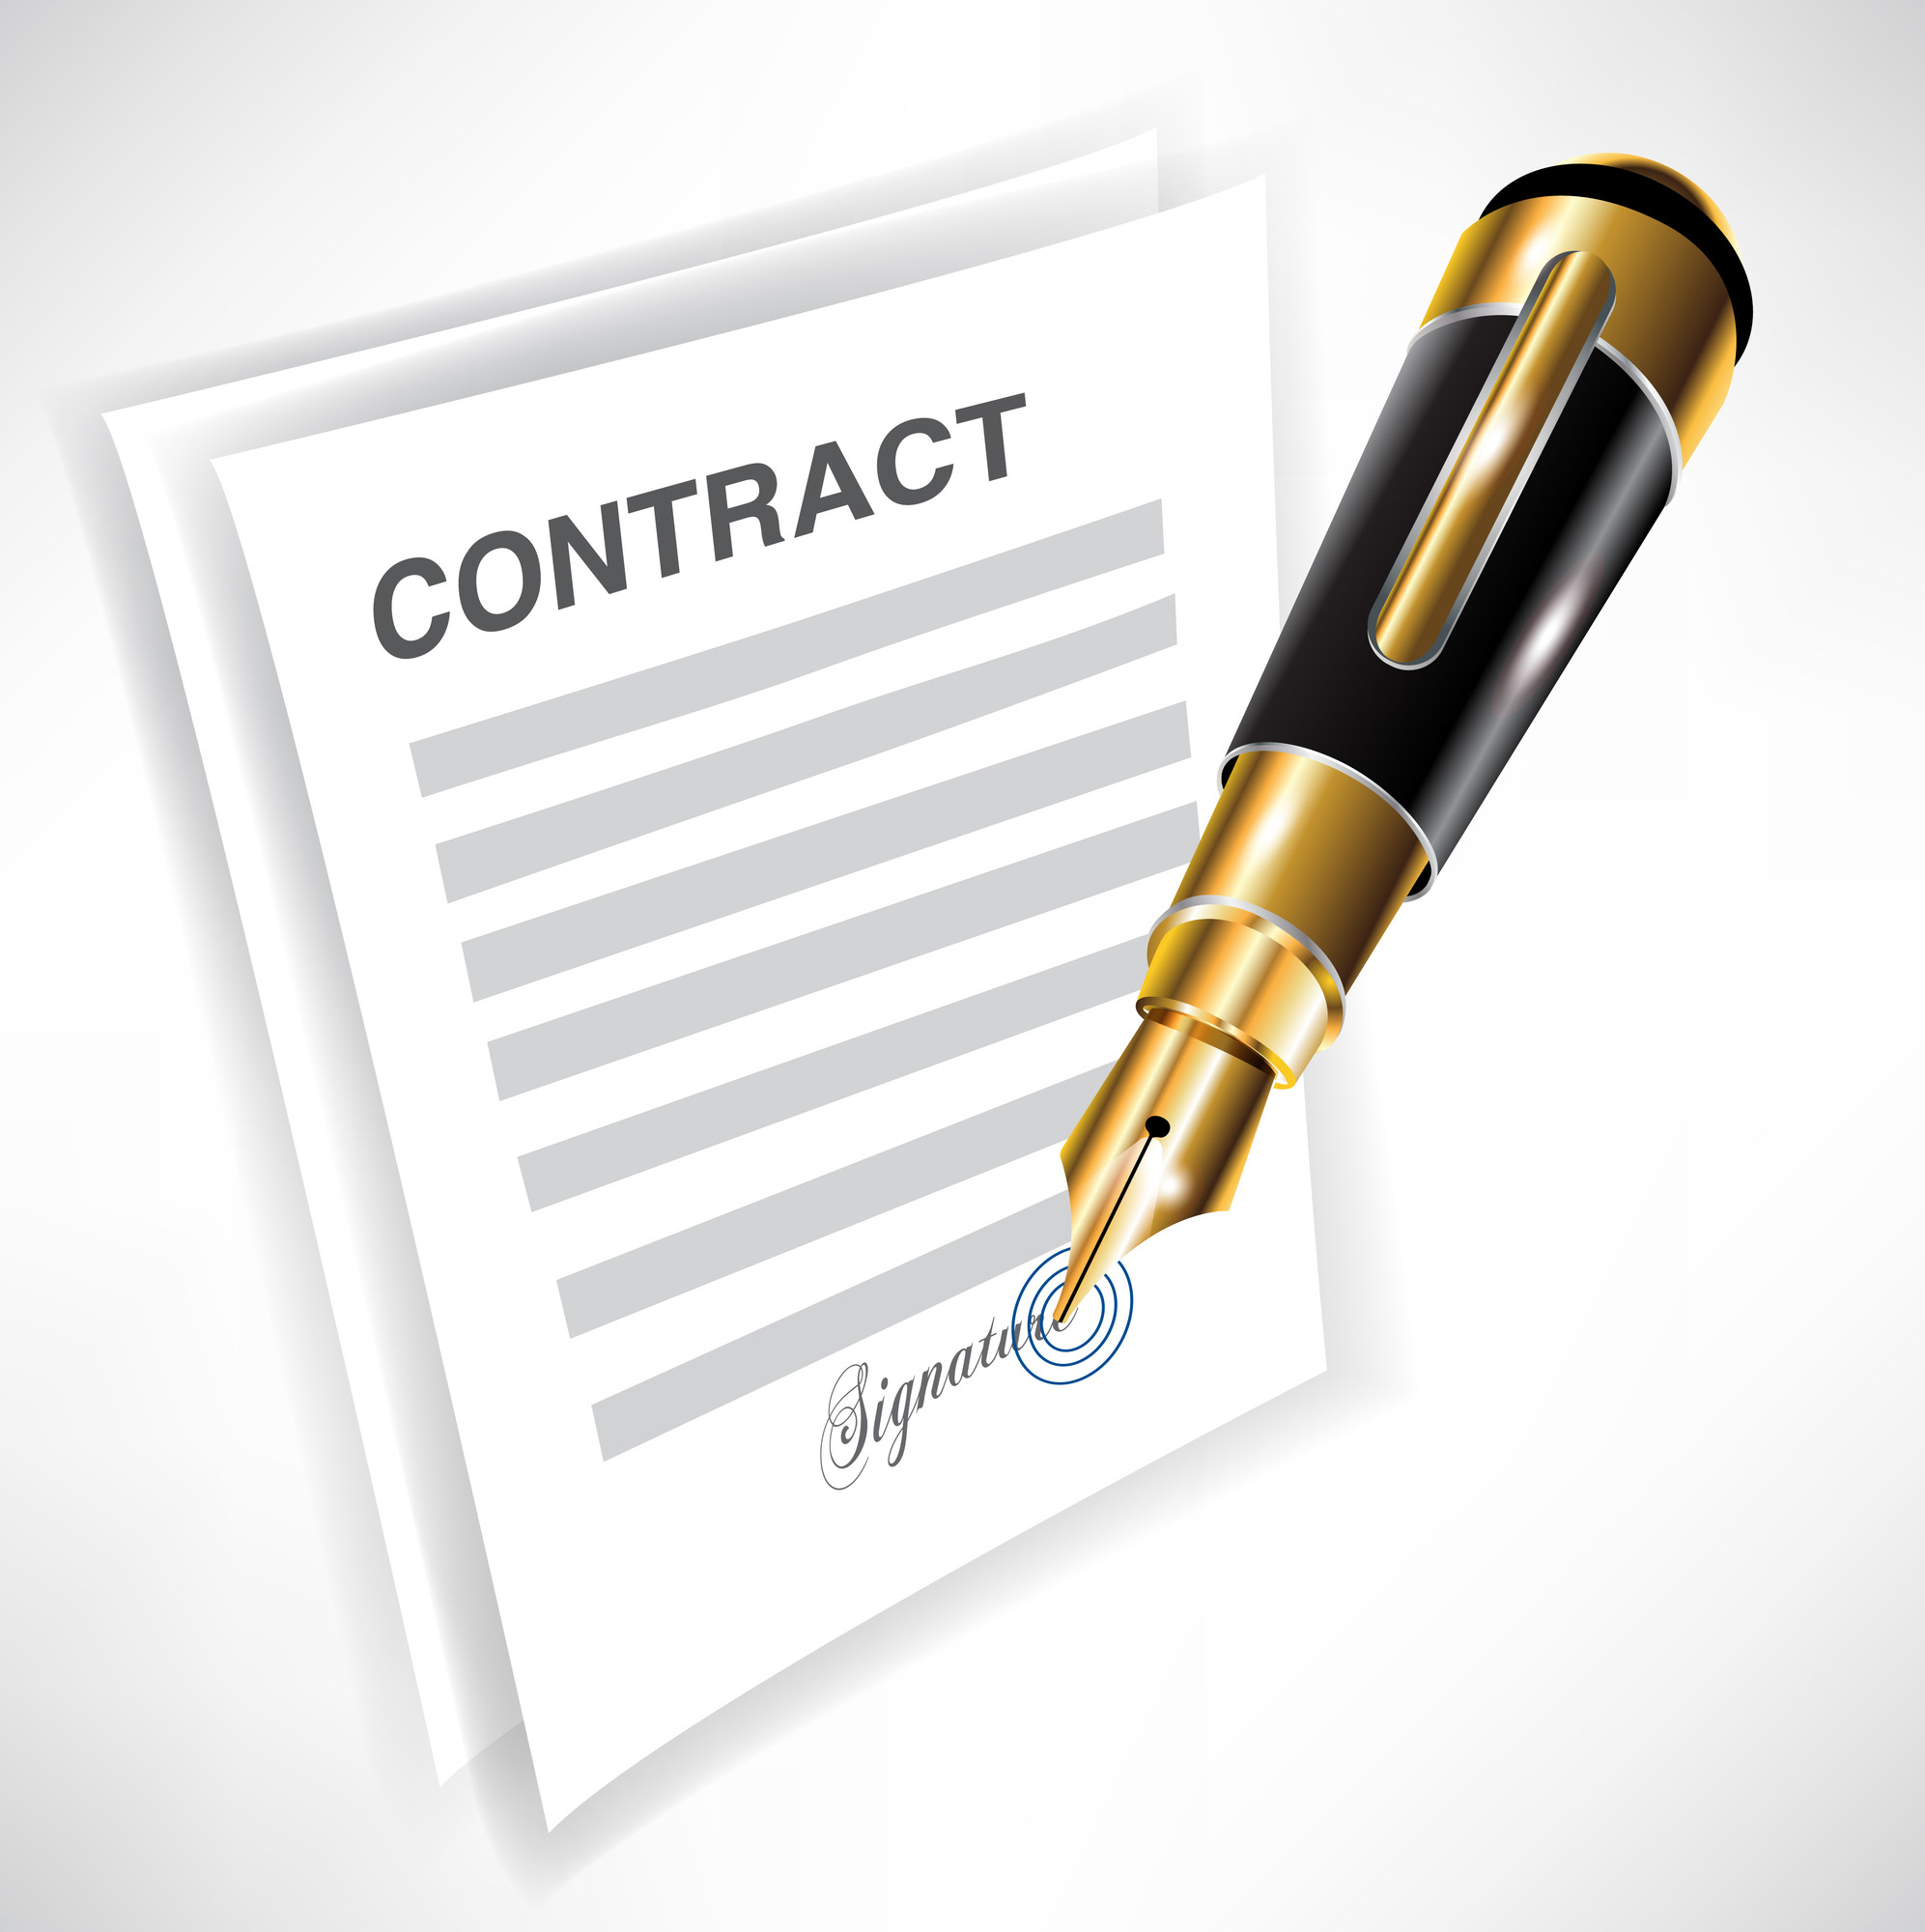 Software as a service contract